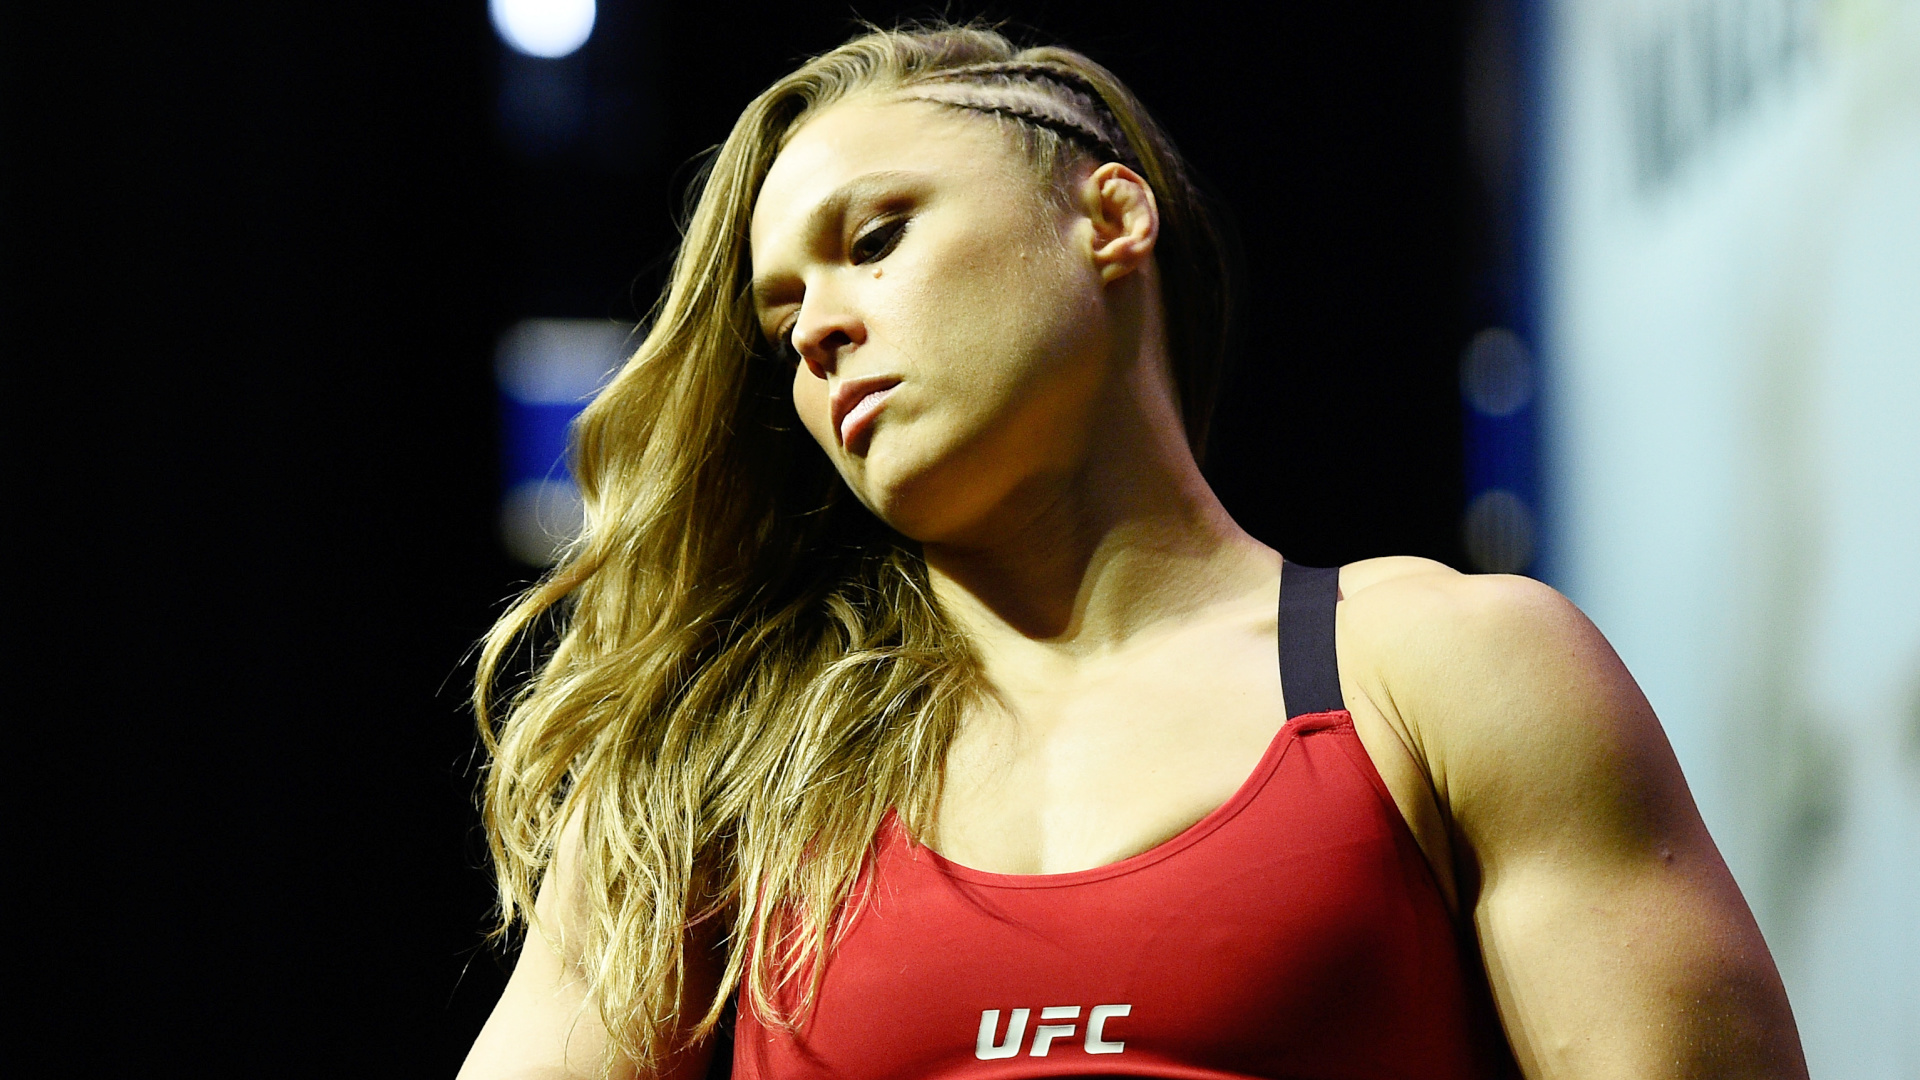 Life in the ring: Ronda Rousey's alarming future